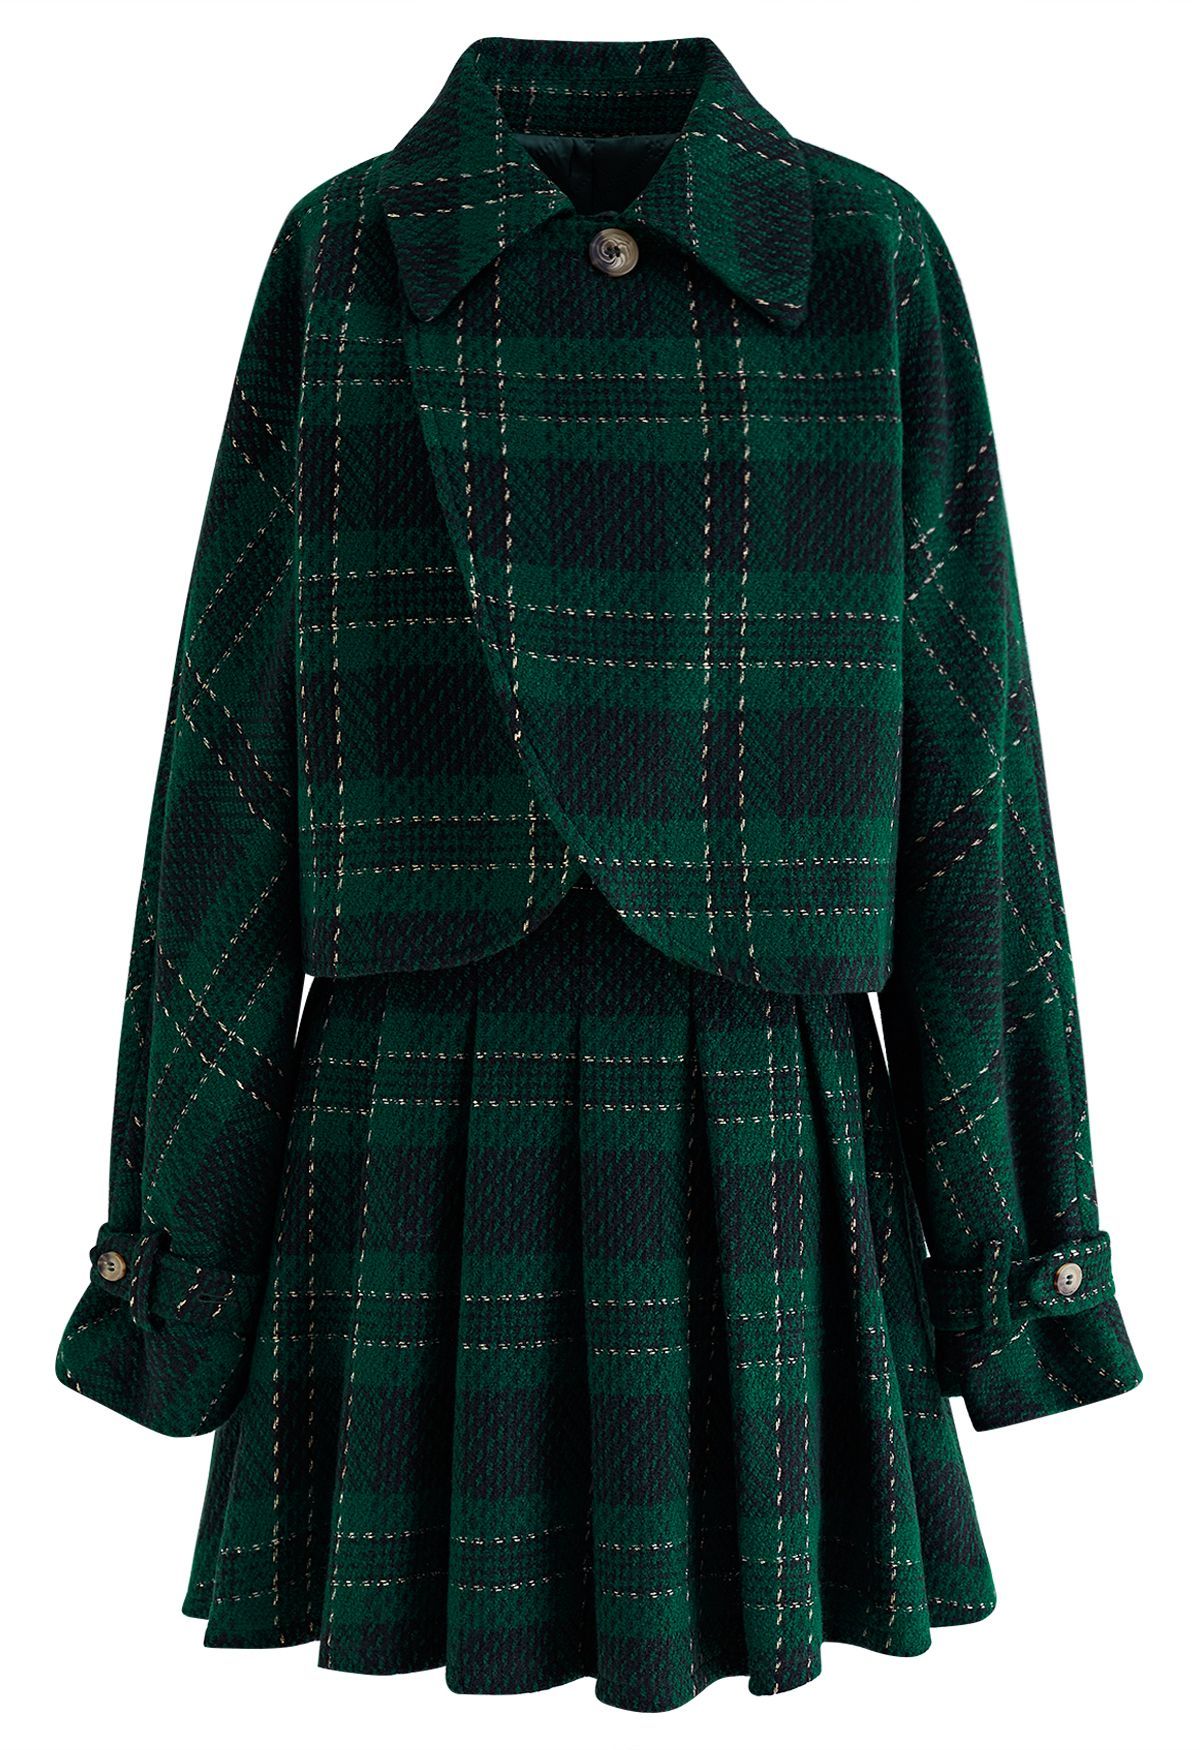 Metallic Plaid Tweed Crop Jacket and Pleated Skirt Set in Green | Chicwish